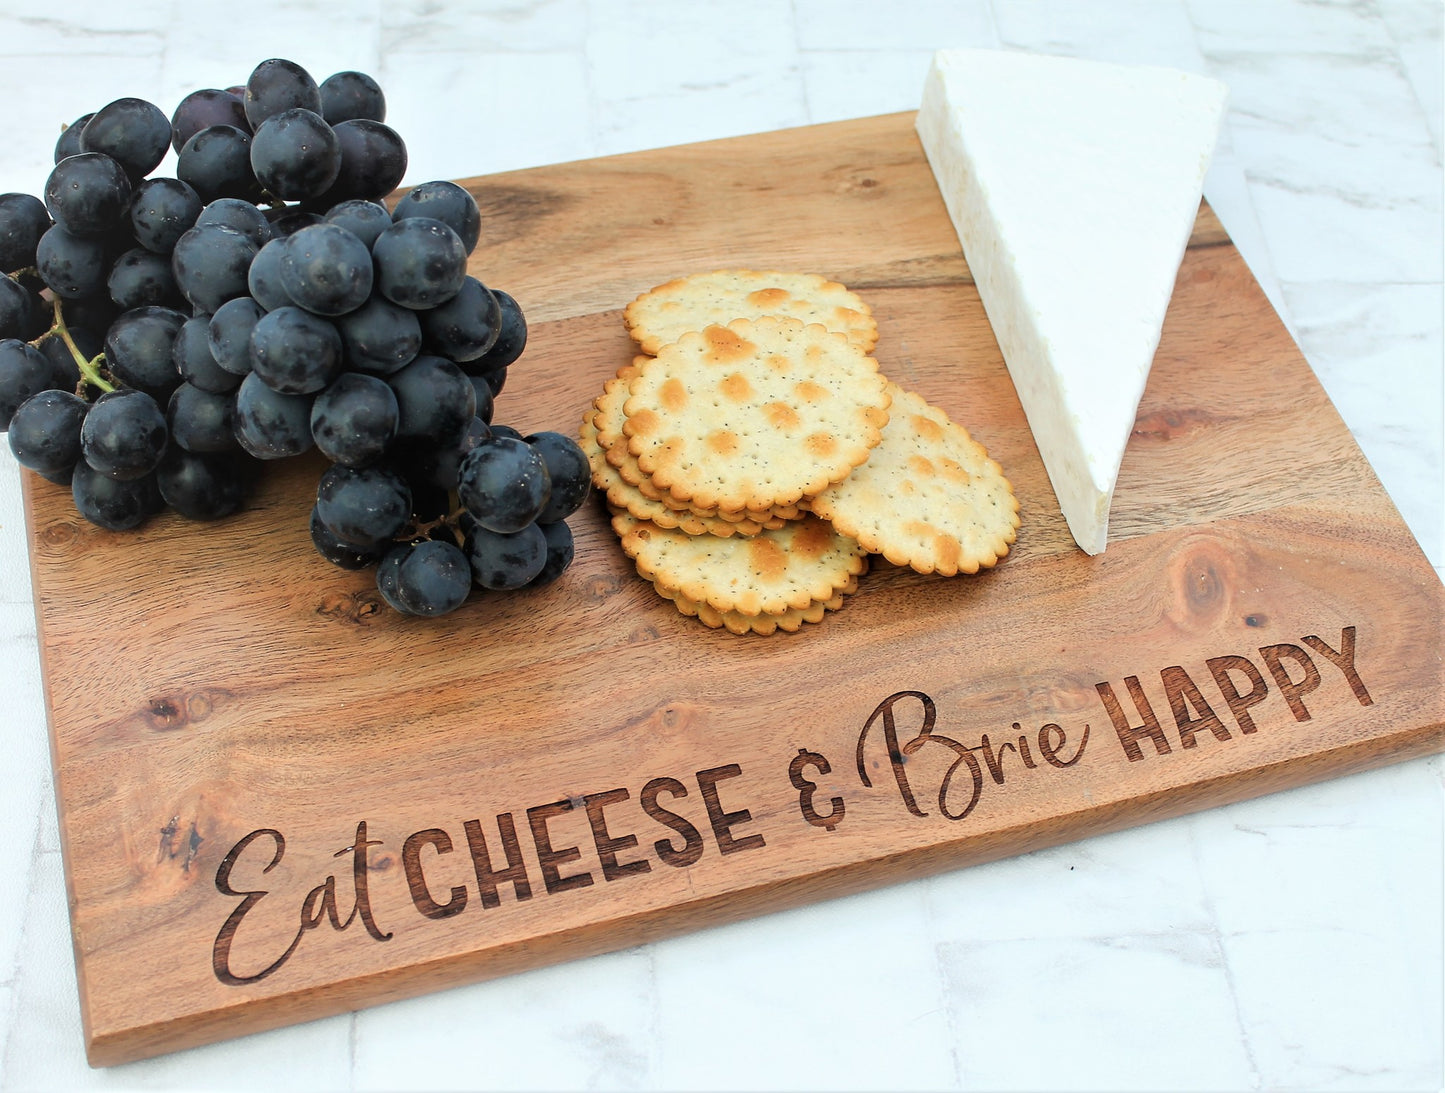 Brie happy wooden cheese board engraved funny pun